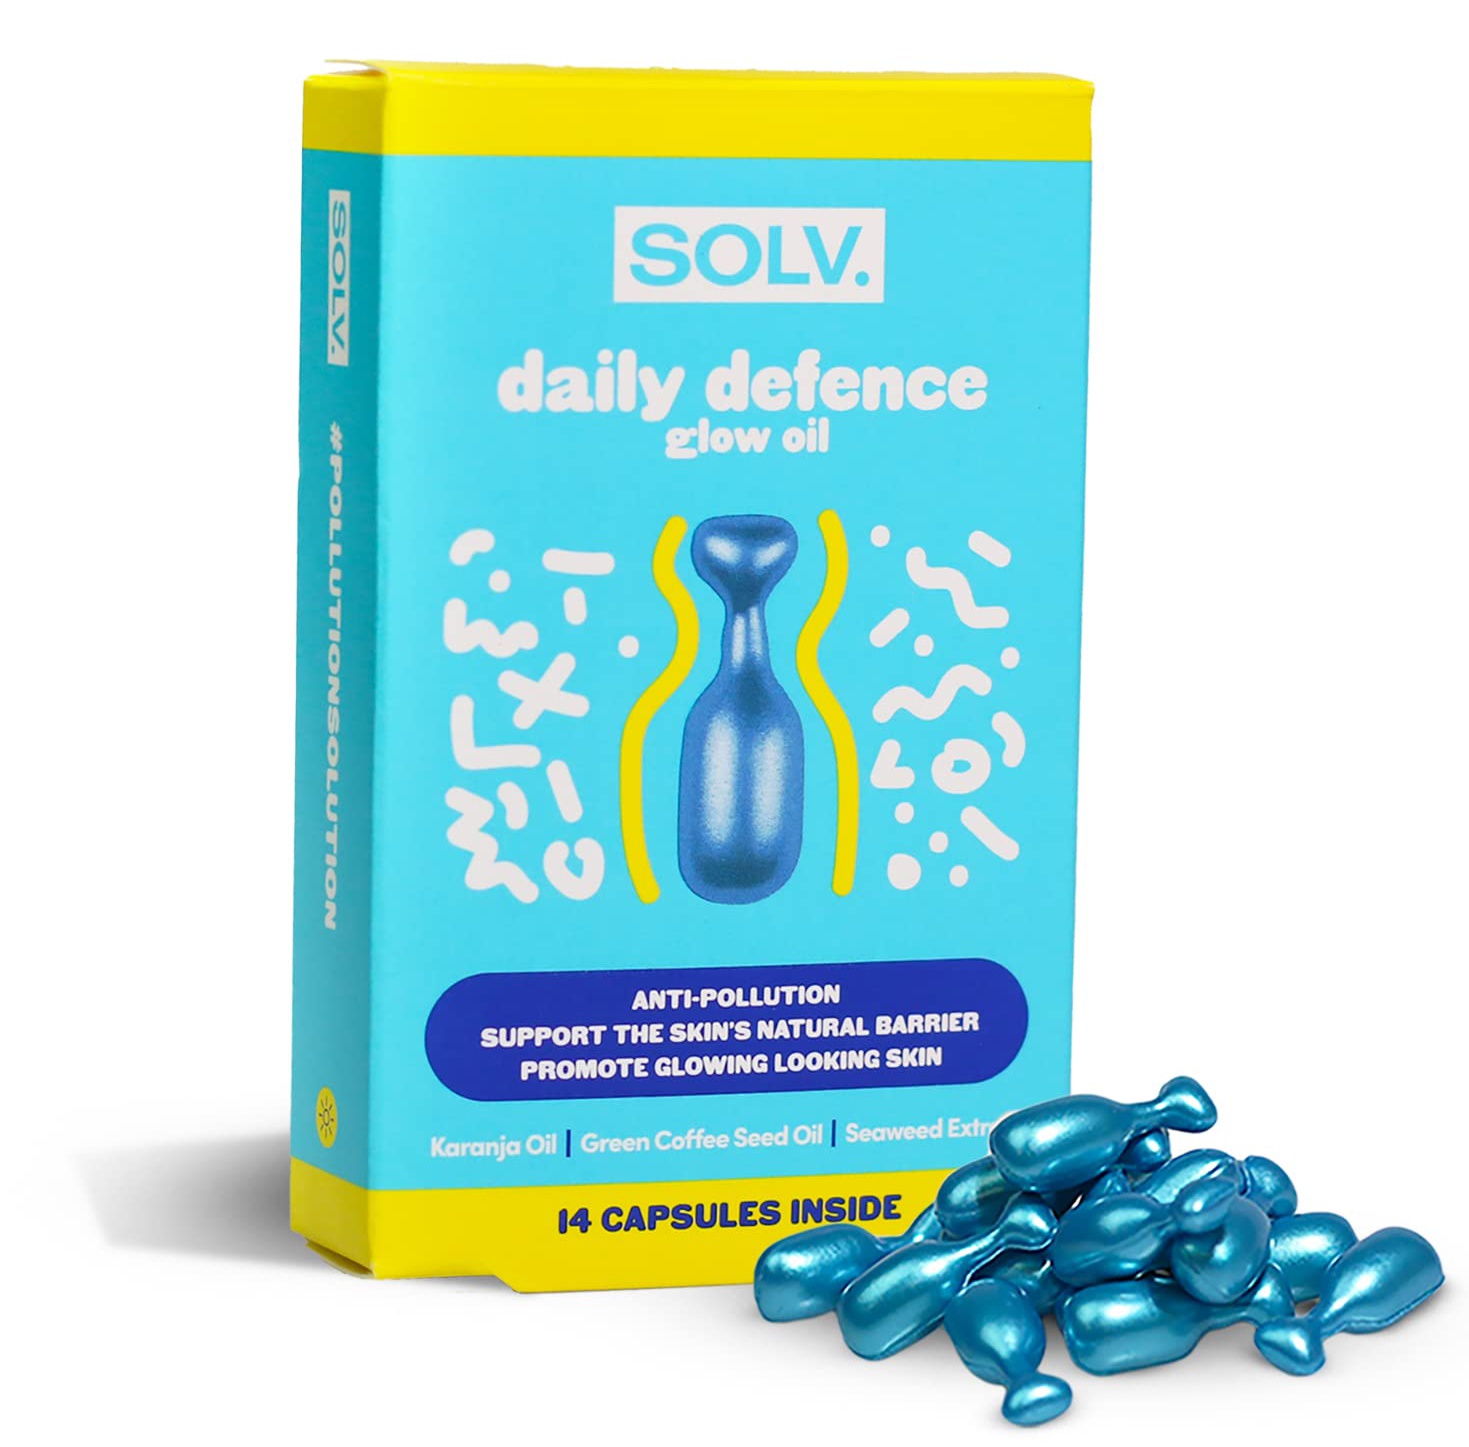 Solv. Daily Defence Glow Oil